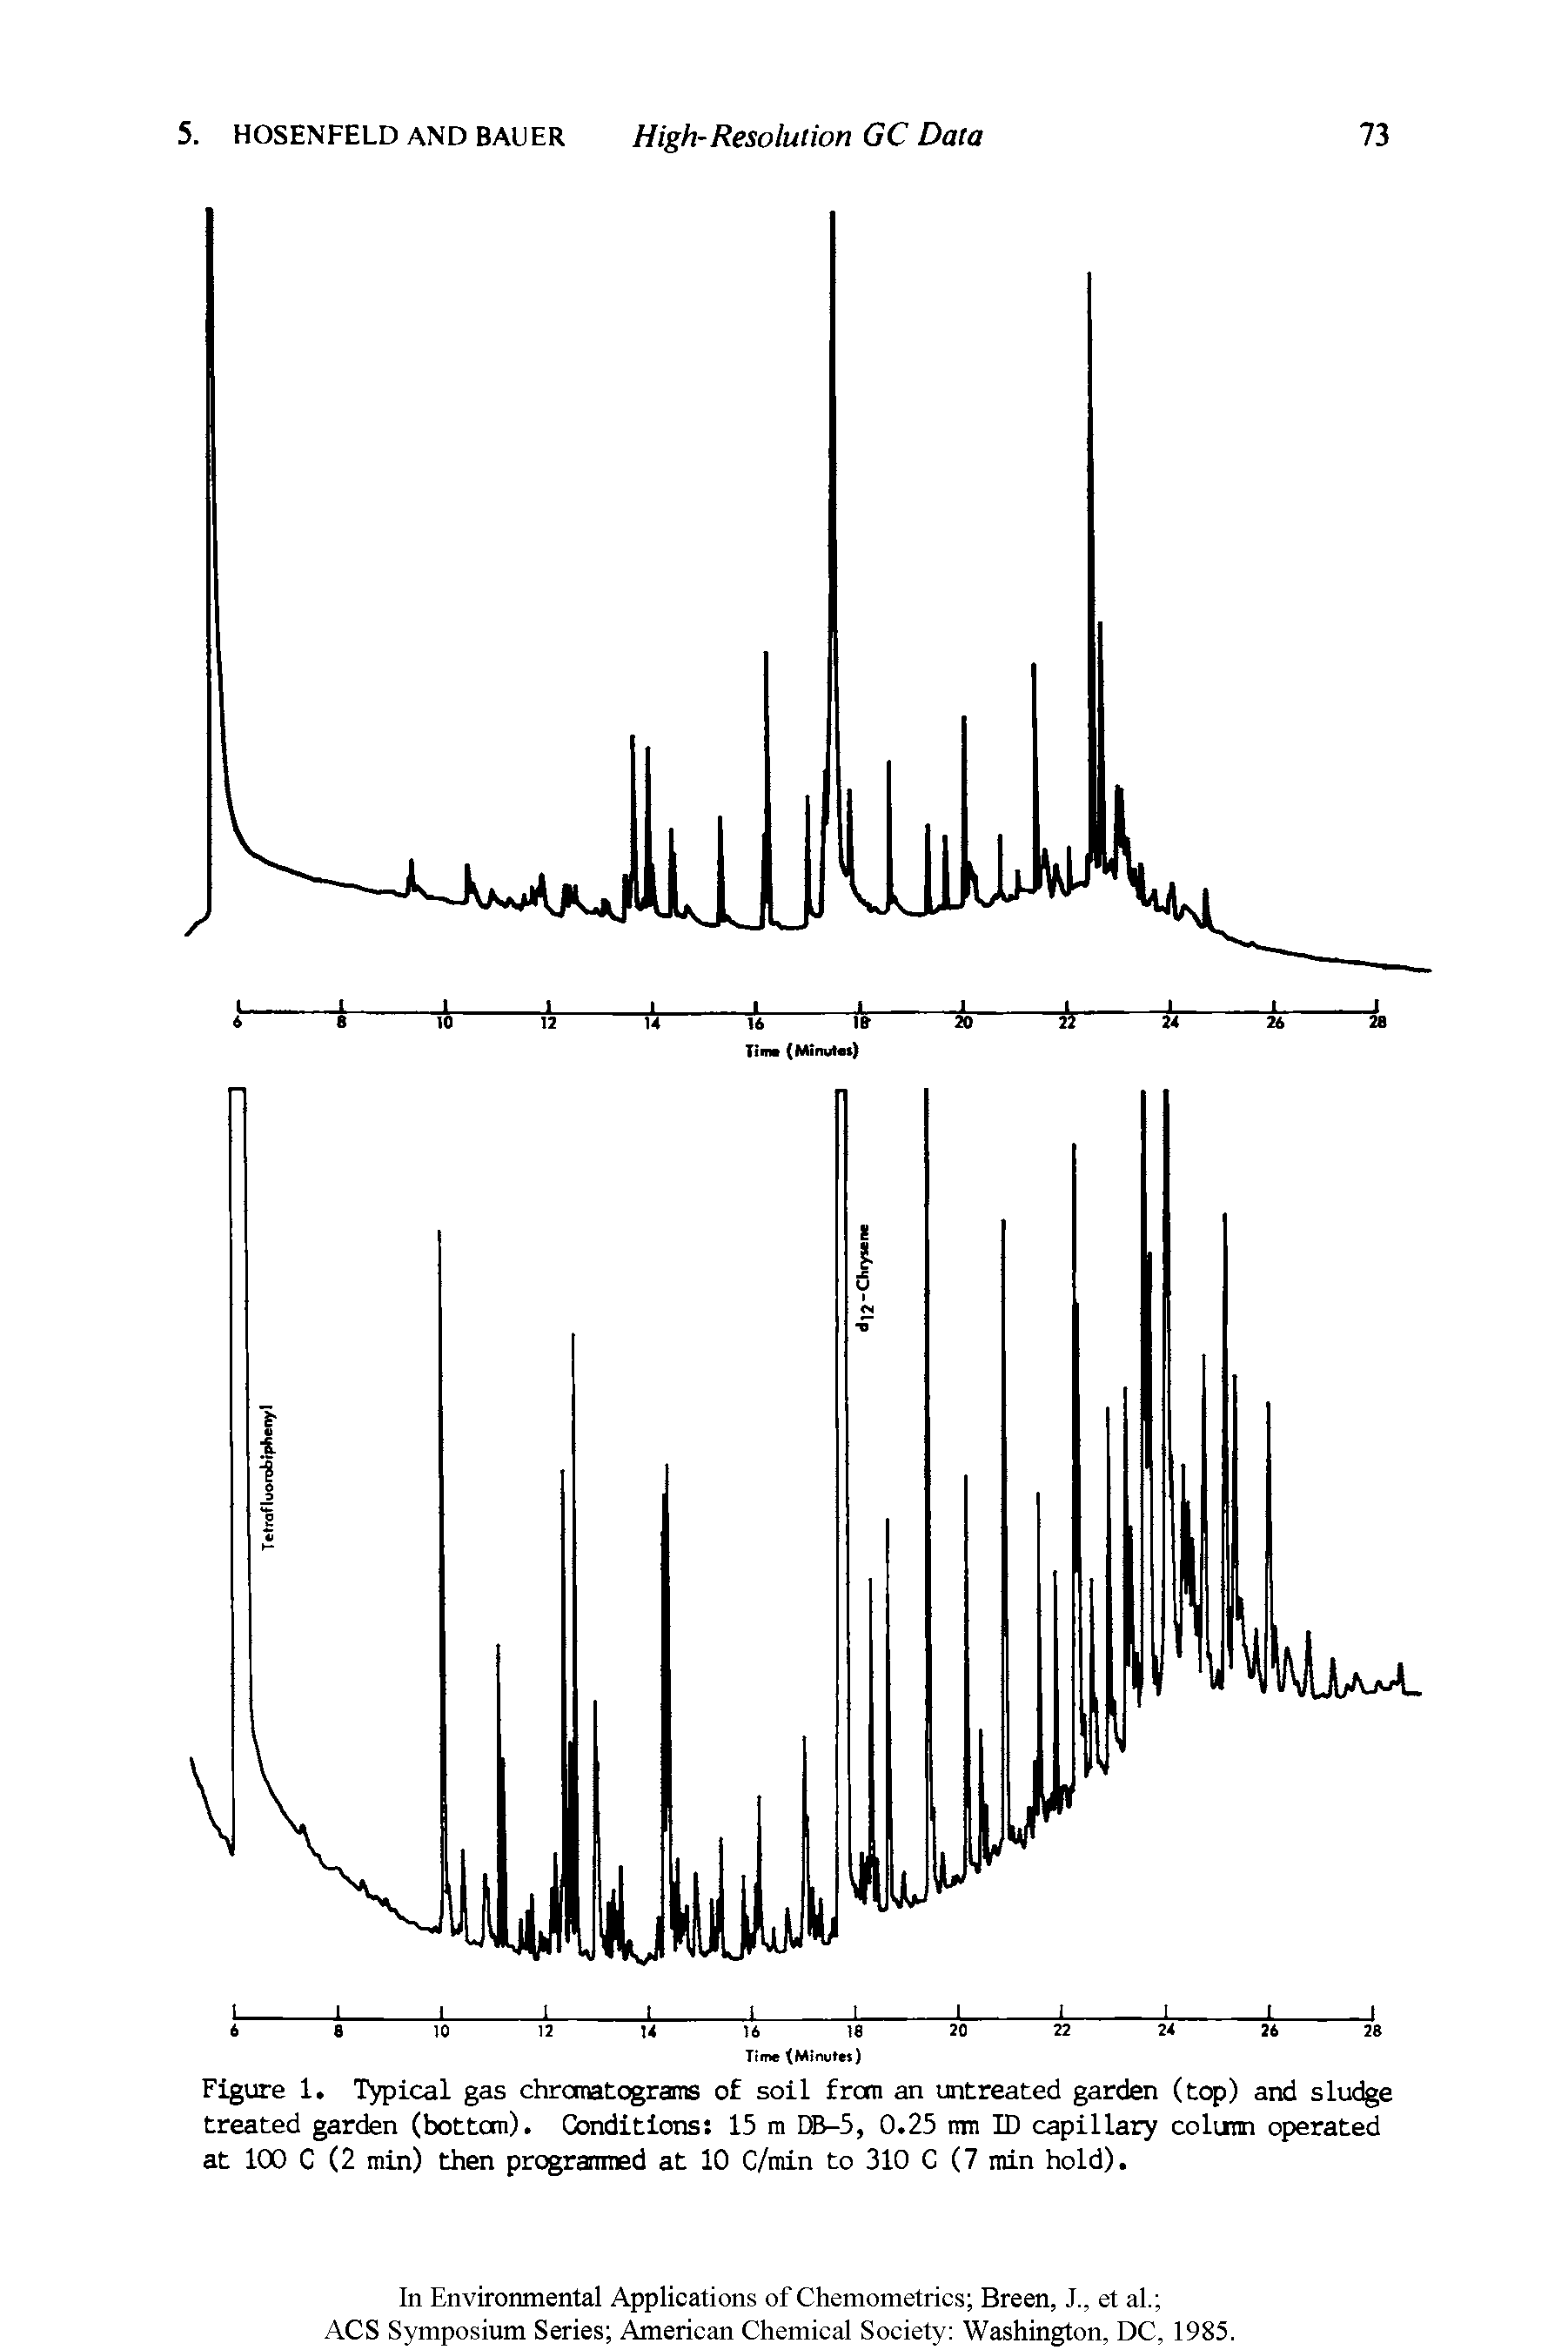 Figure 1. Typical gas chromatograms of soil frcm an untreated garden (top) and sludge treated garden (bottcm). Conditions 15 m DB-5, 0.25 nm ID capillary colimn operated at 100 C (2 min) then programned at 10 C/min to 310 C (7 min hold).